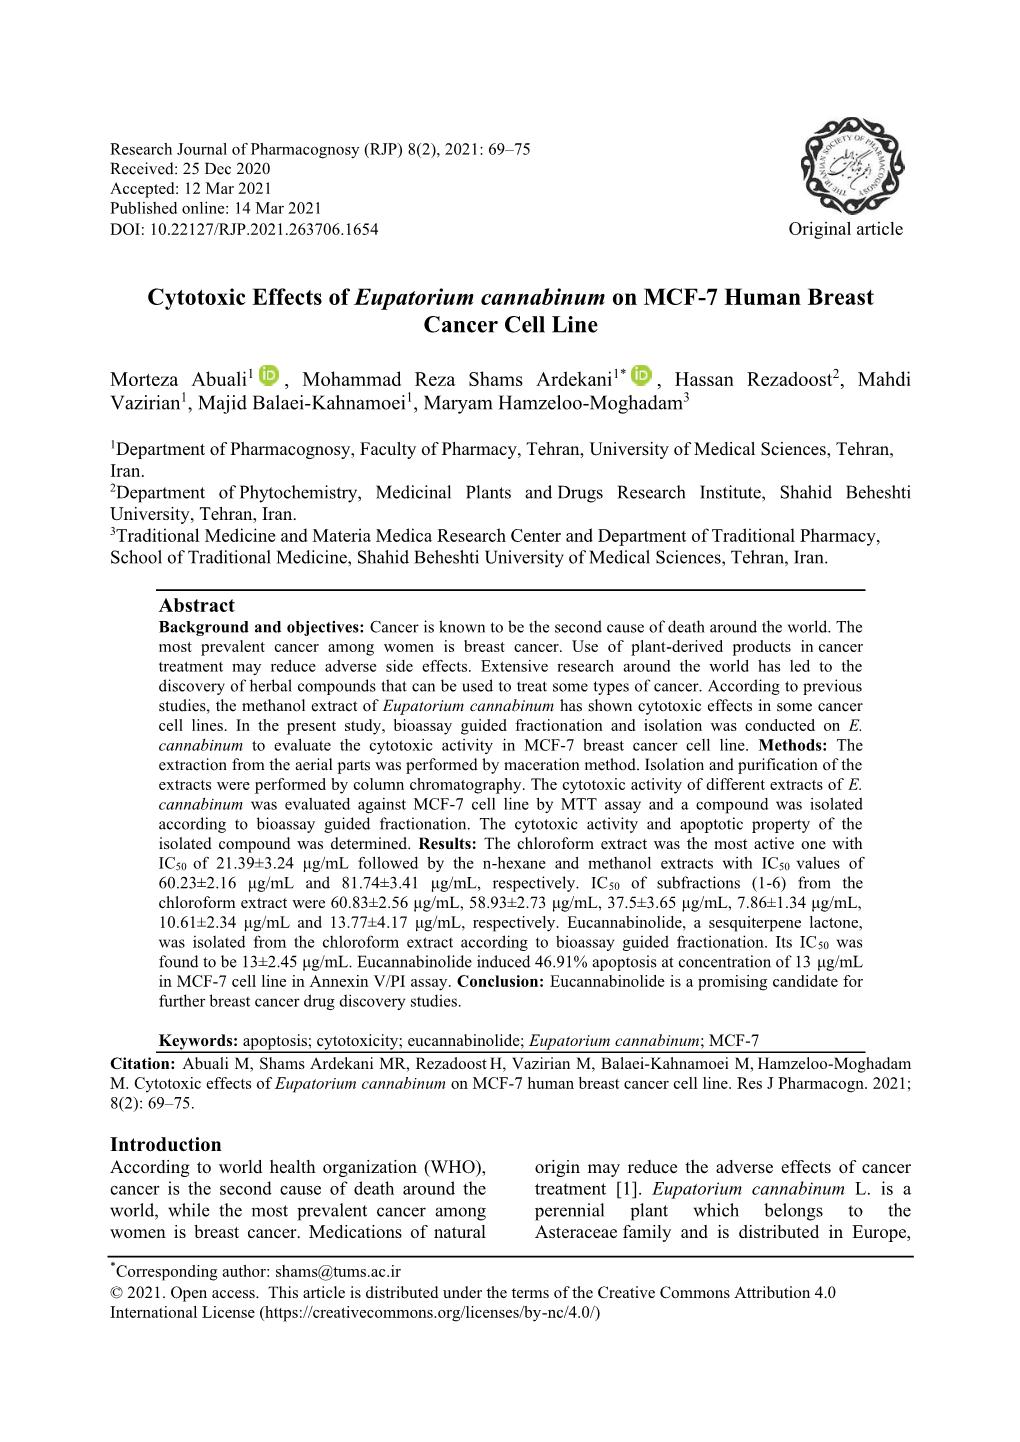 Cytotoxic Effects of Eupatorium Cannabinum on MCF-7 Human Breast Cancer Cell Line